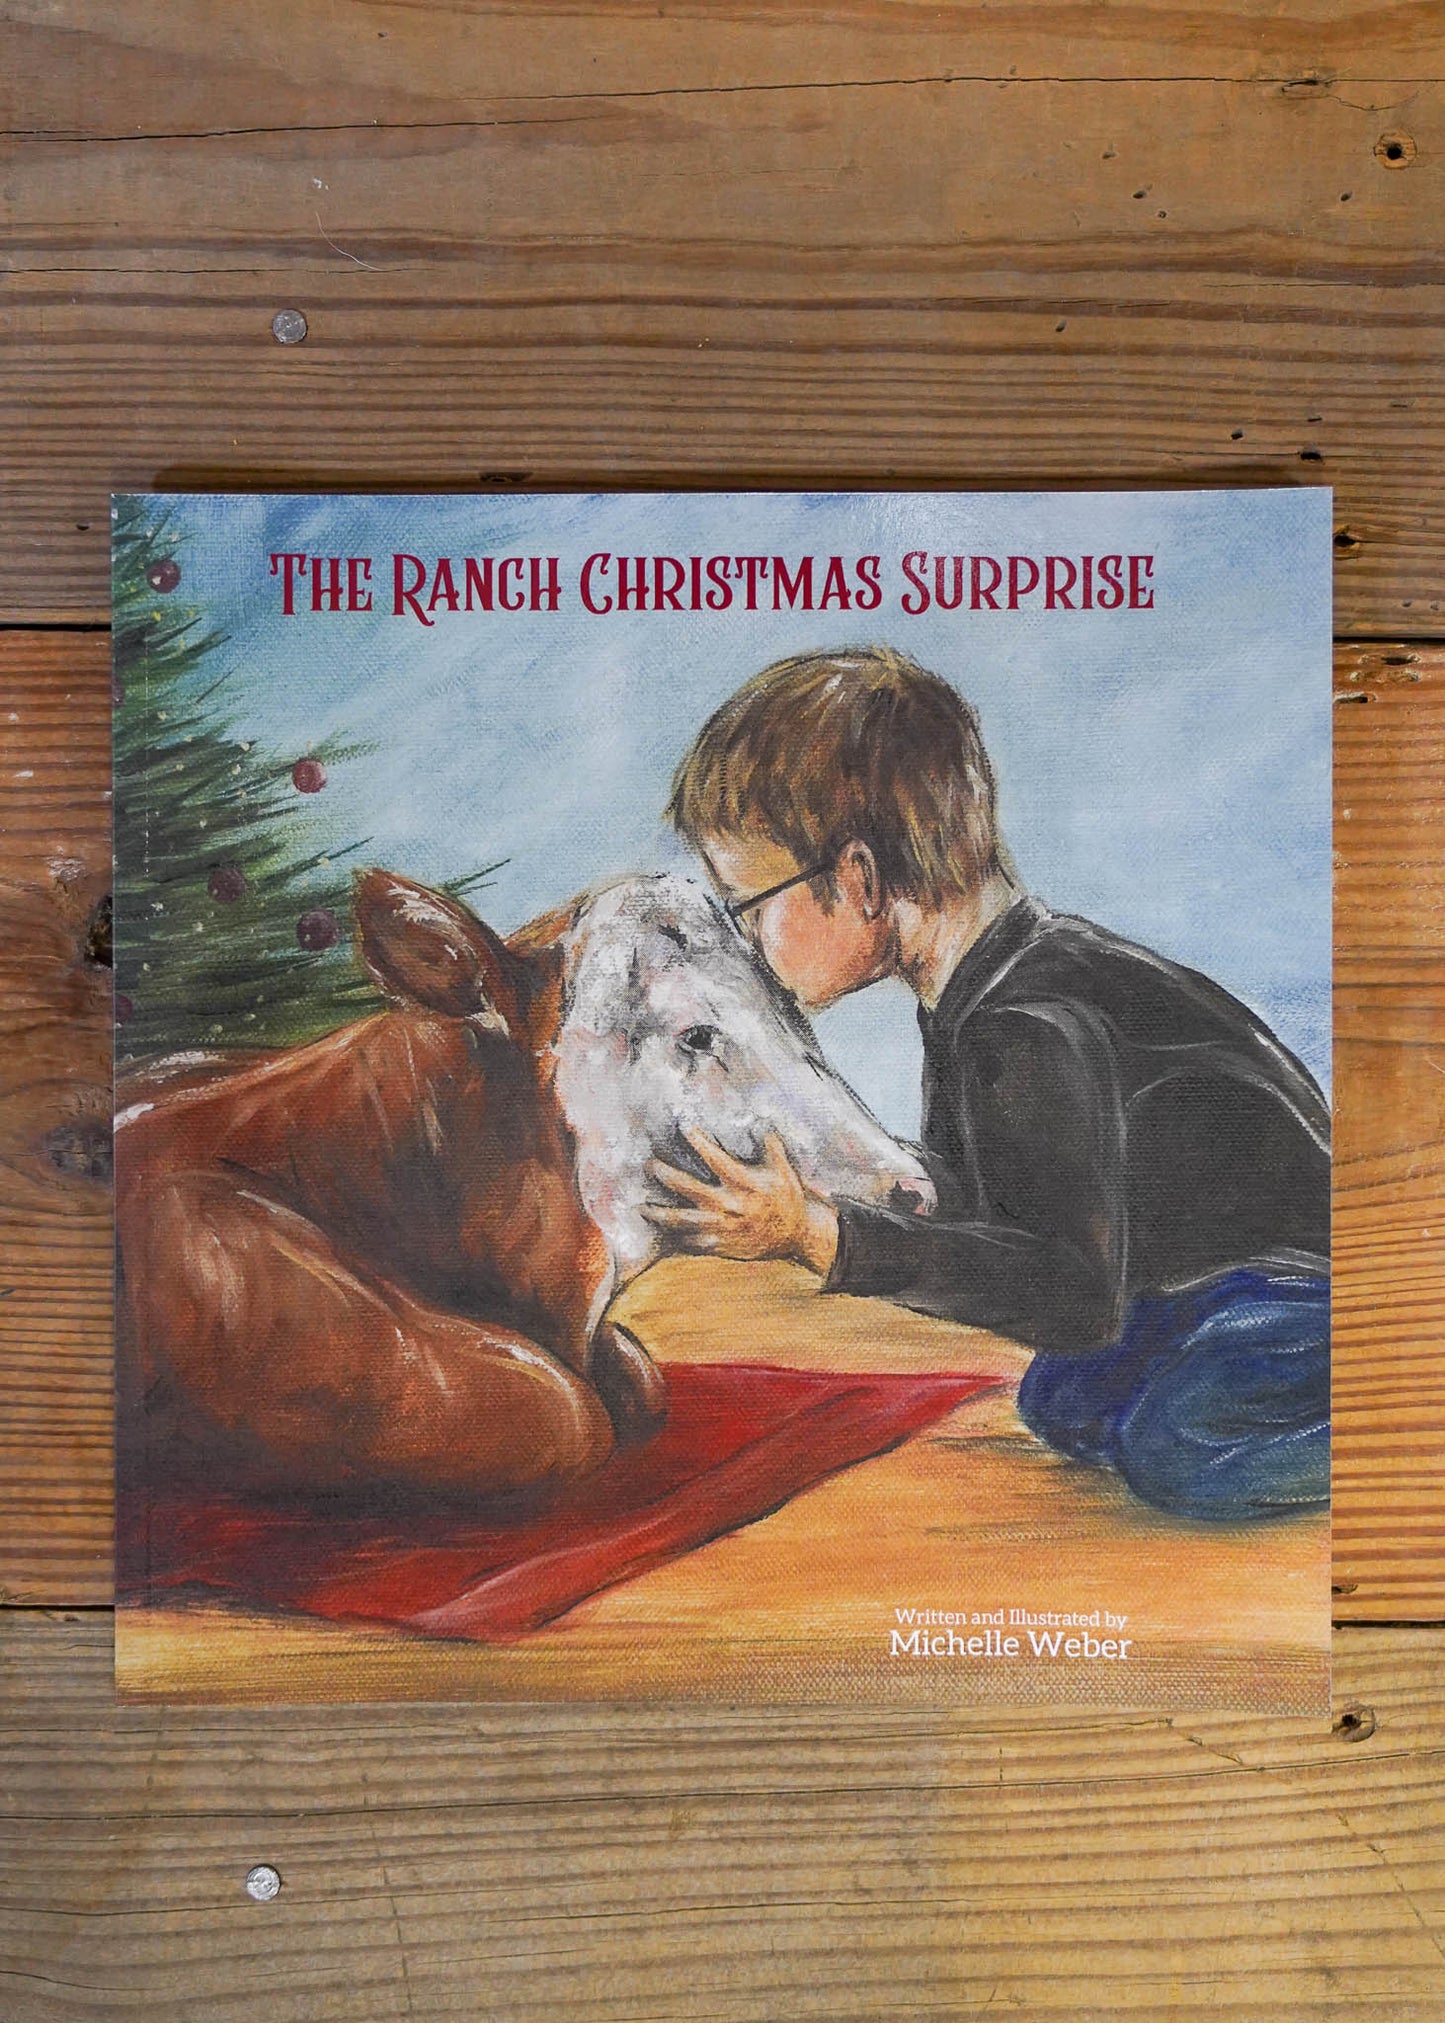 The Ranch Christmas Surprise